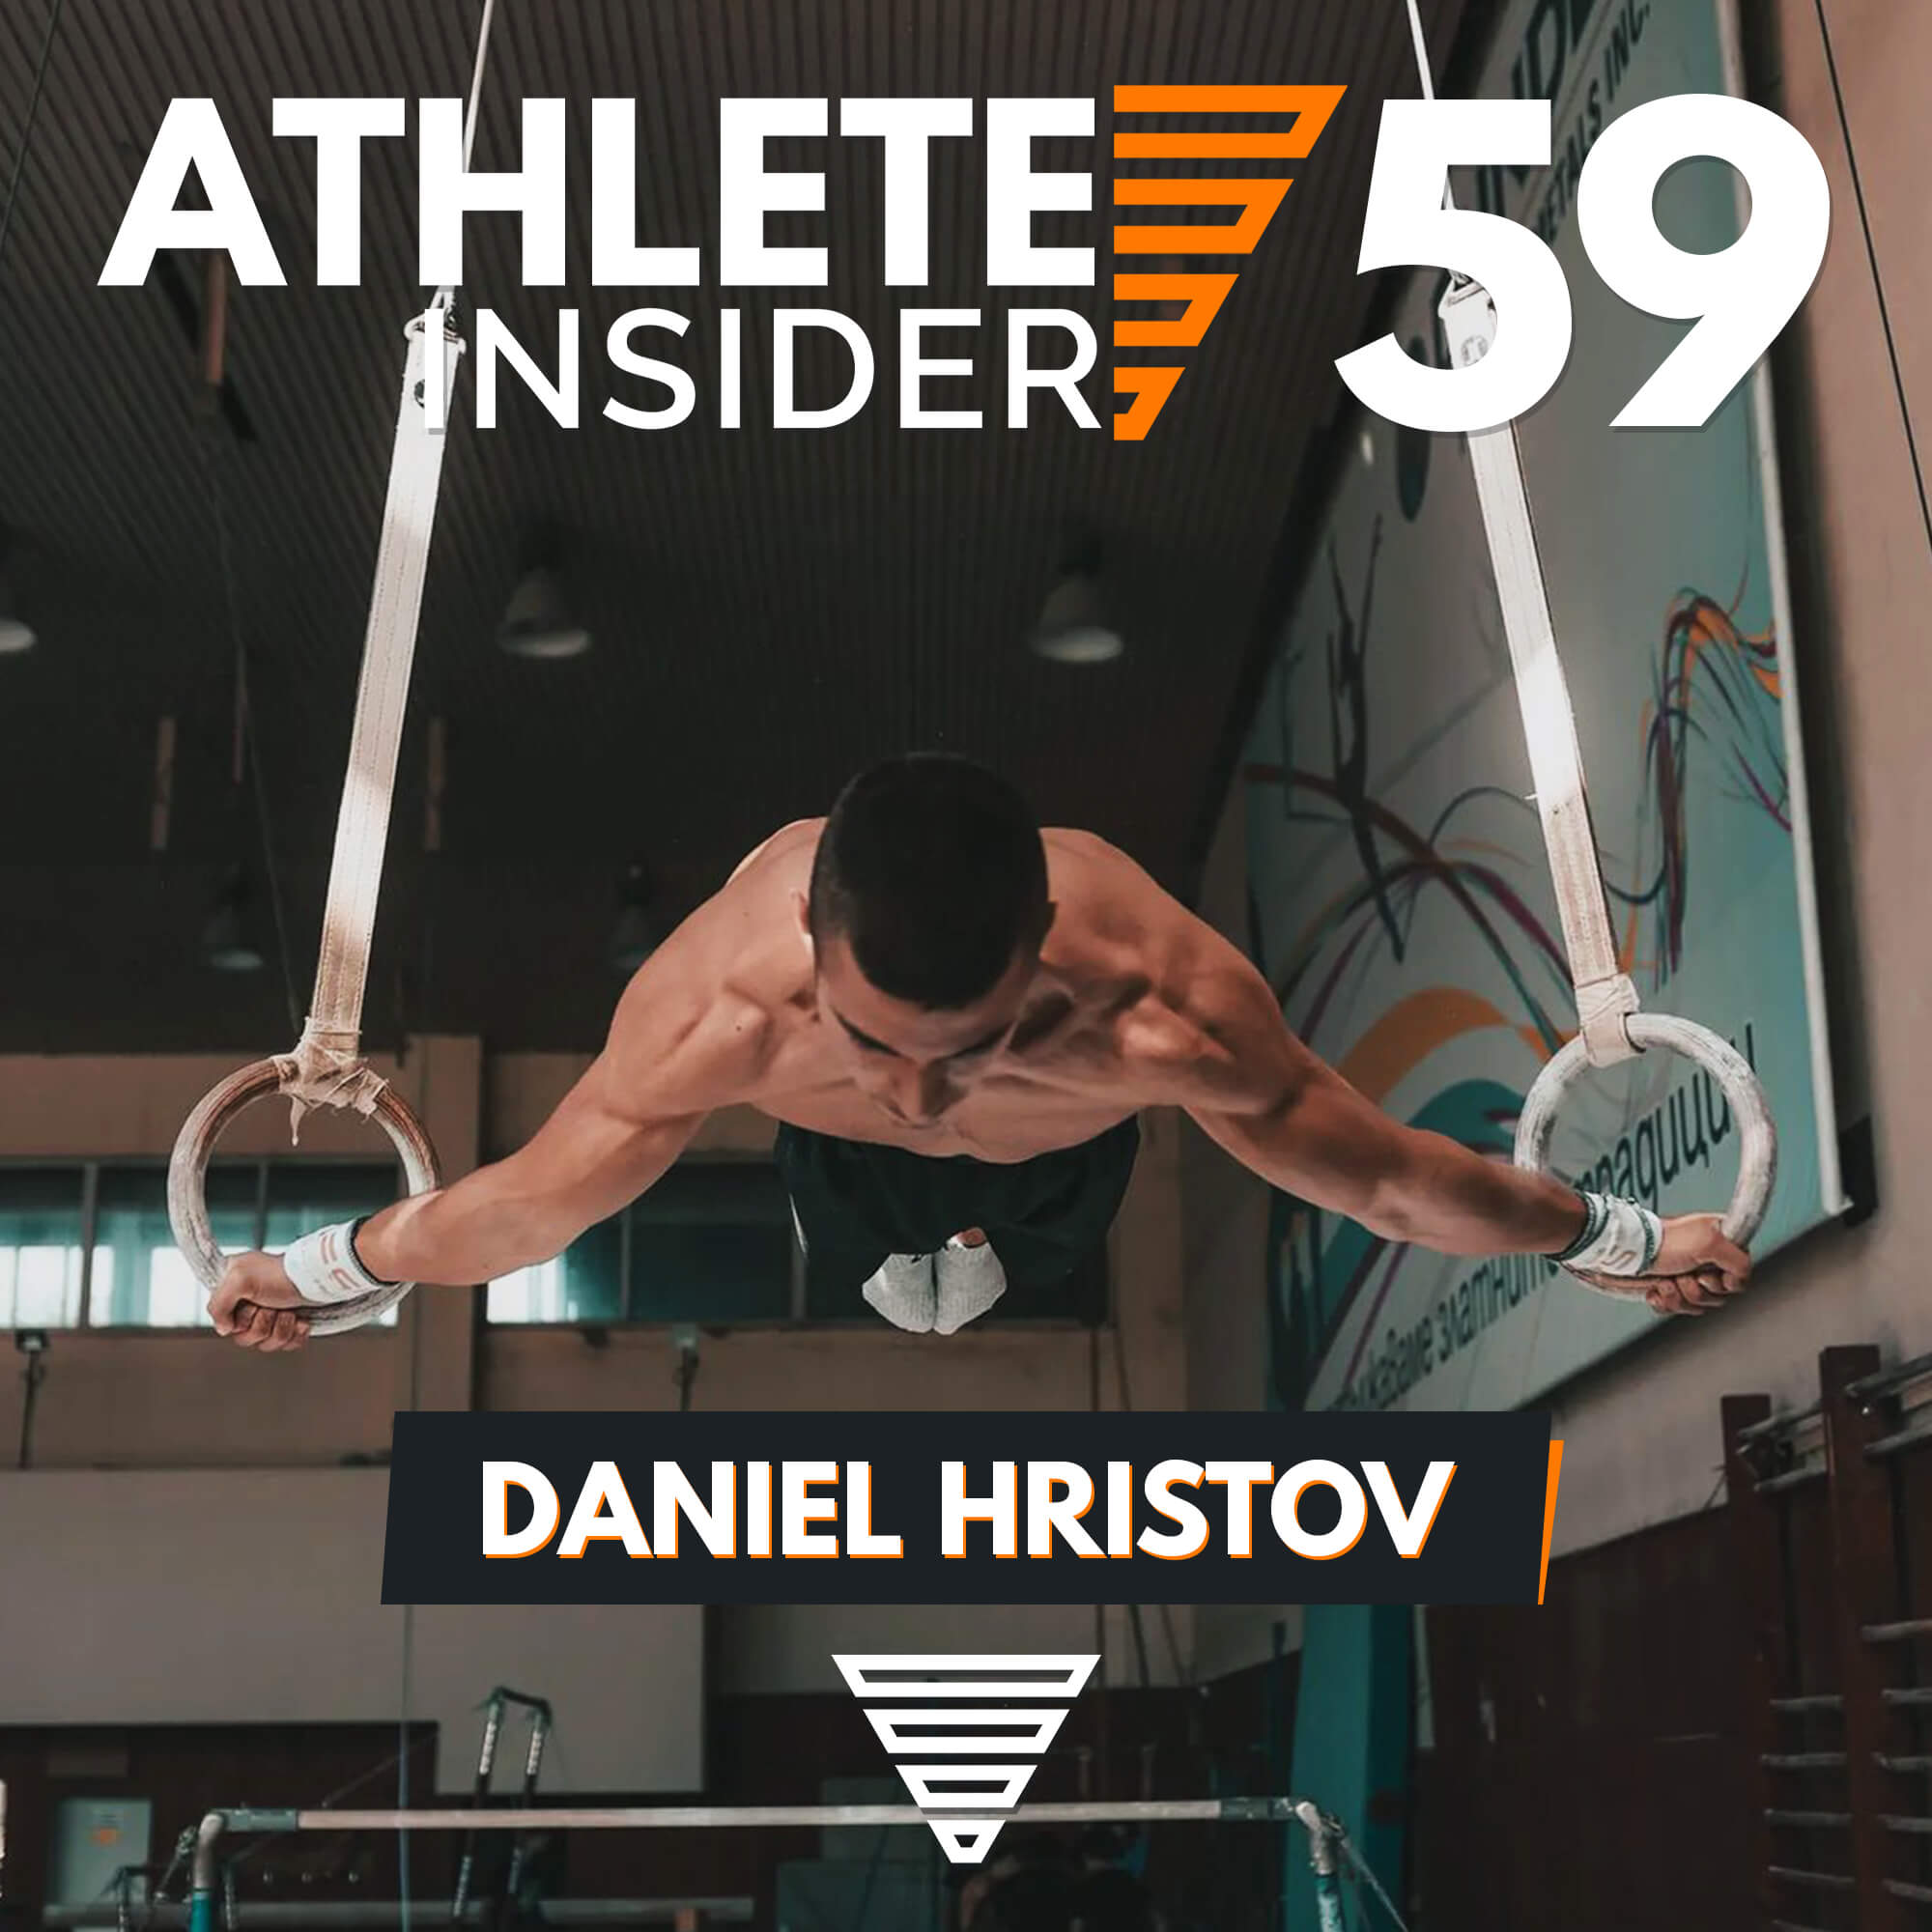 WORLD CHAMPION AFTER 2.5 YEARS | Interview with Daniel Hristov | Athlete Insider Podcast #59